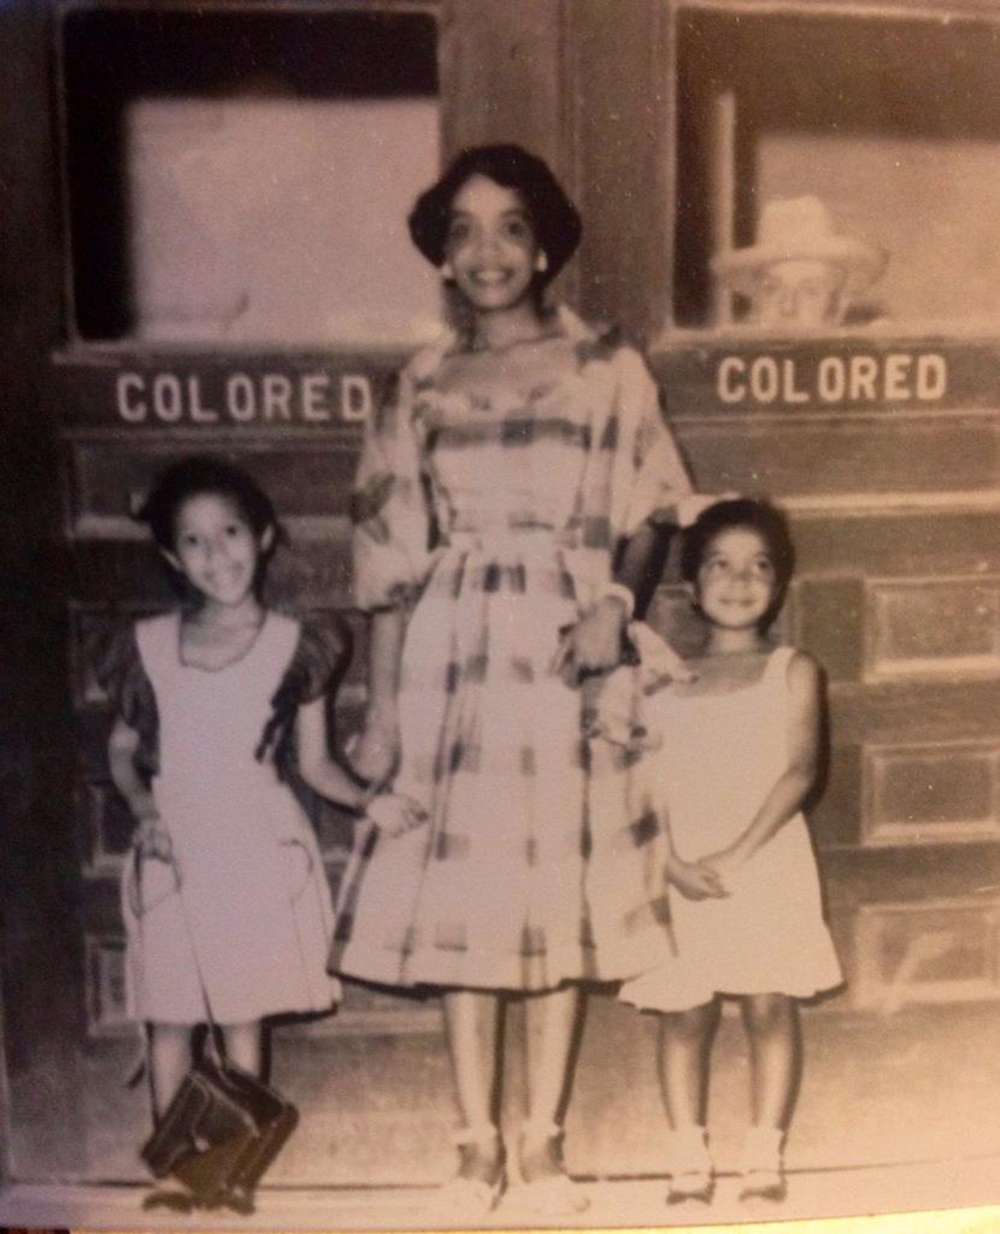 Mildred McHenry and two little girls in front of a 'Colored' sign